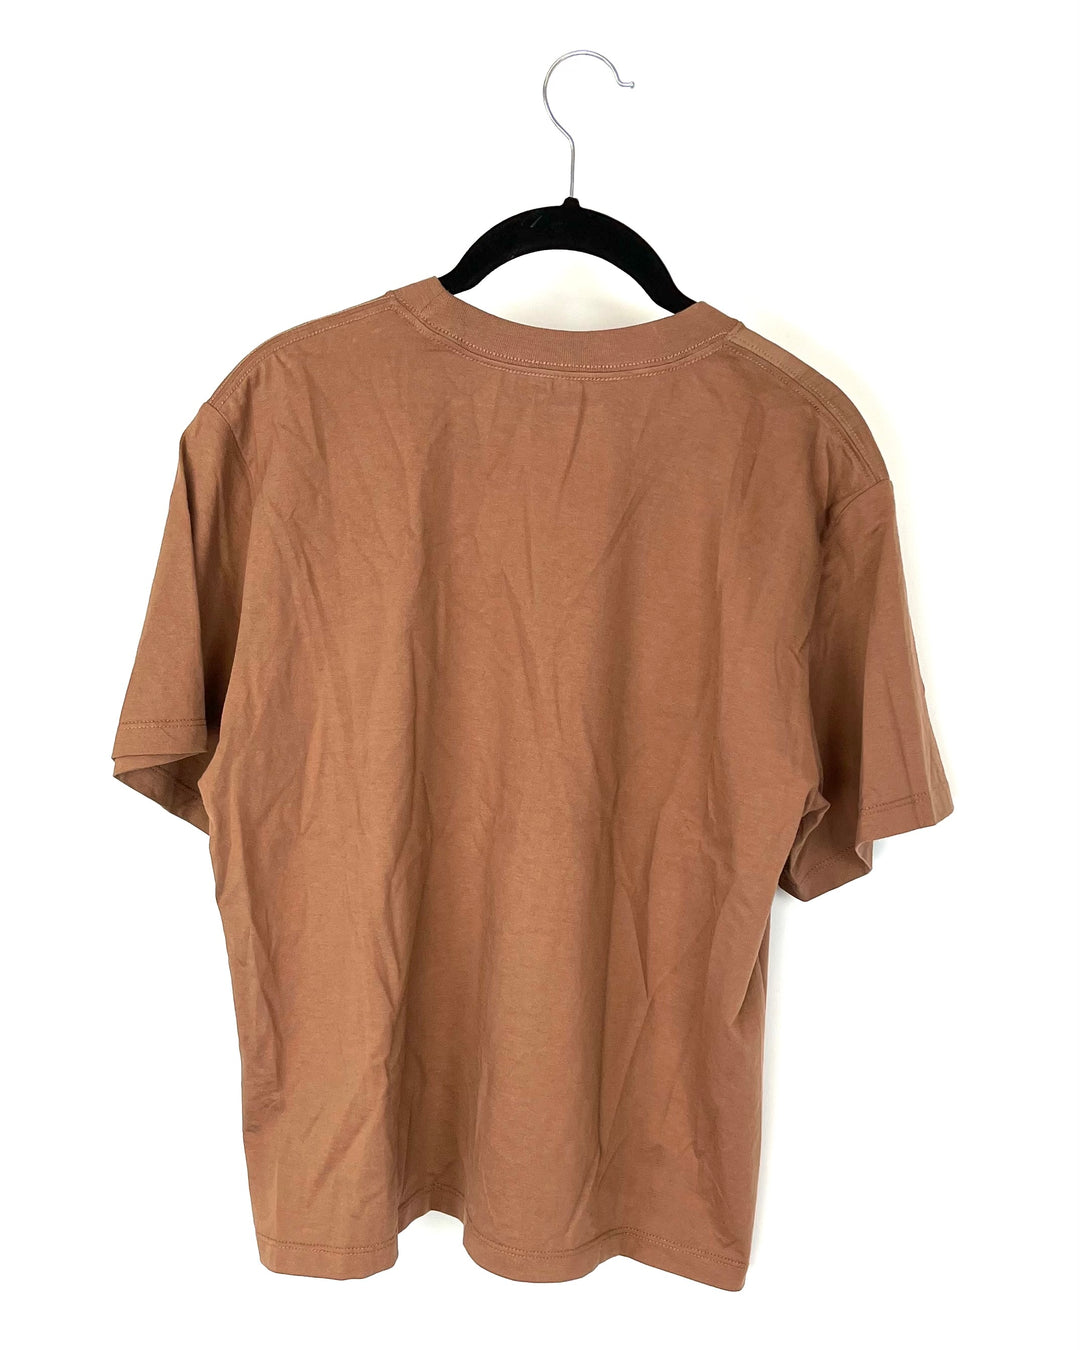 Brown Boxy Short Sleeve Top - Small